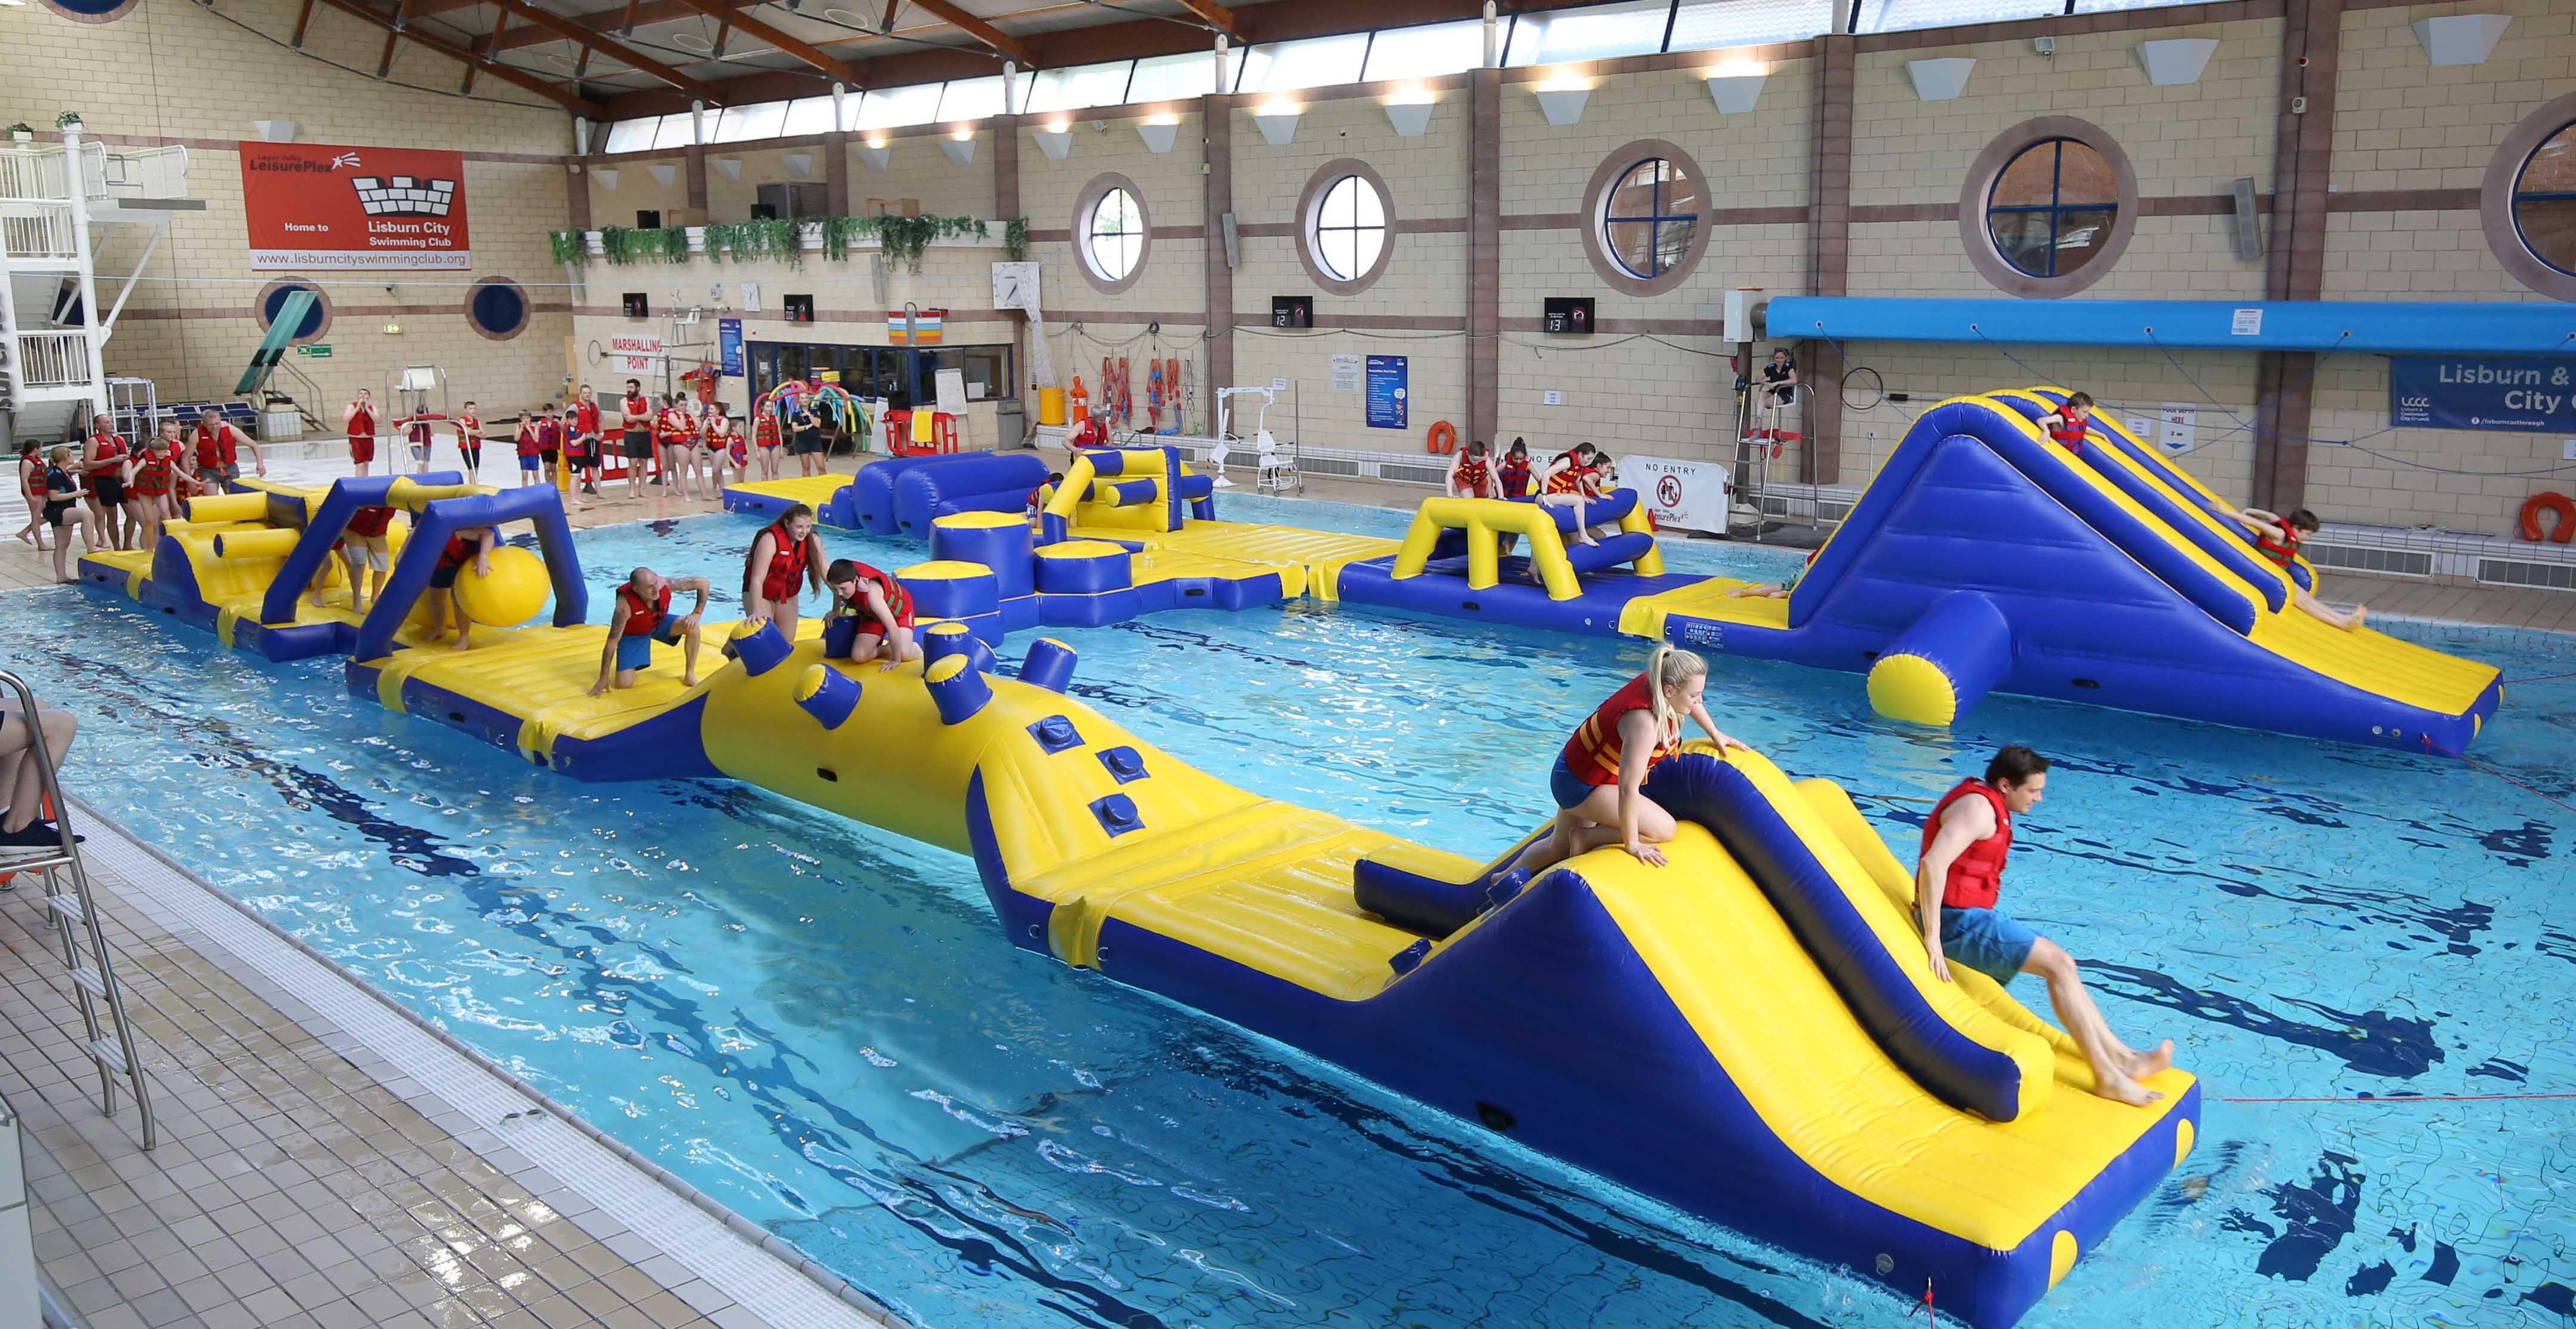 Kids climbing over inflatable pool activity